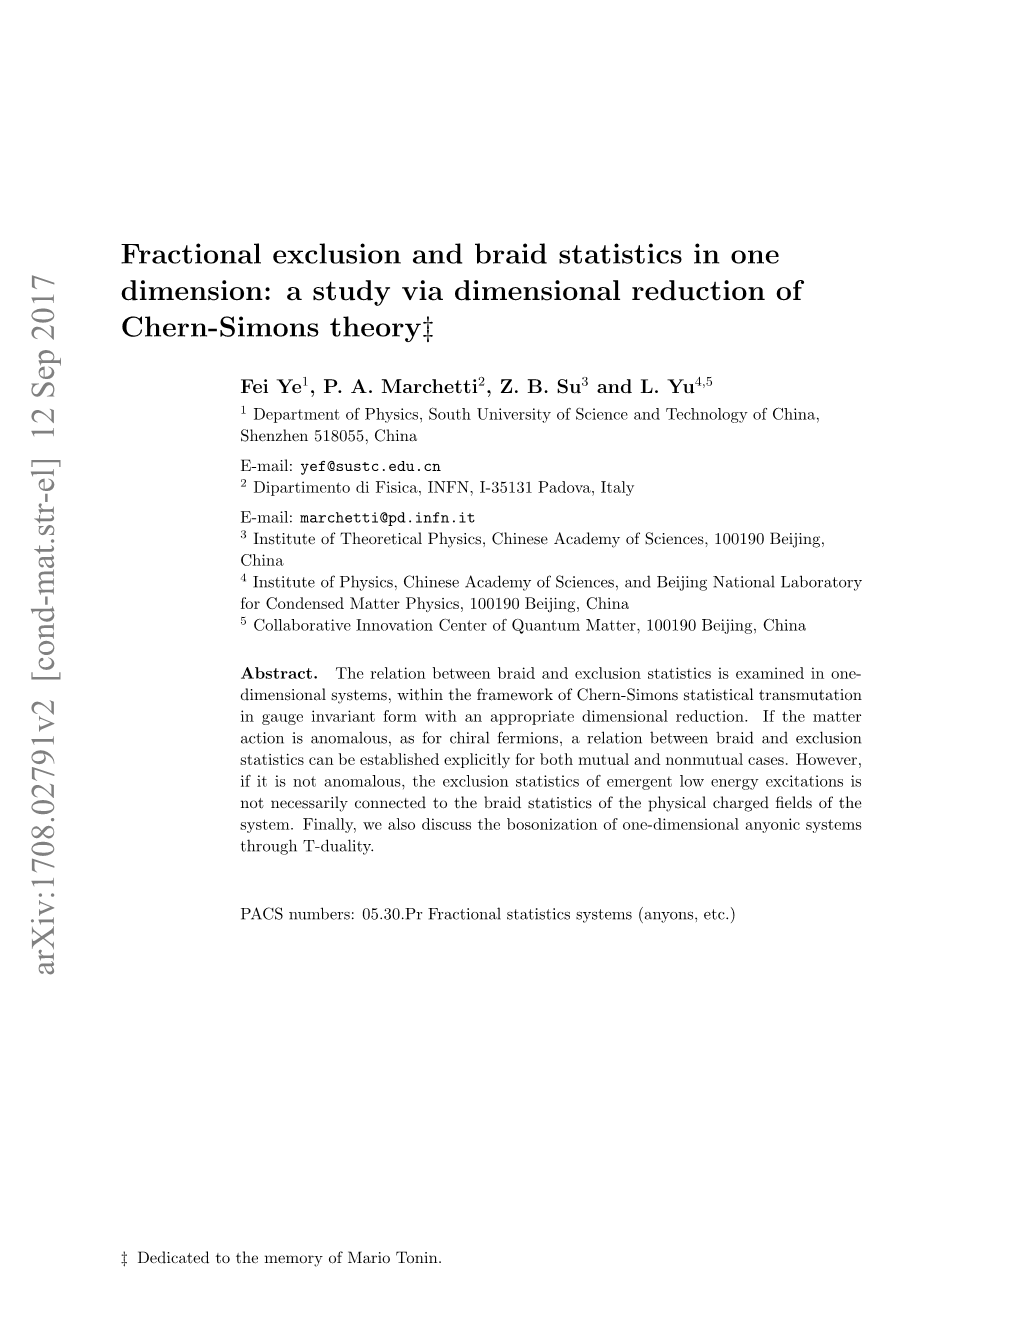 Fractional Exclusion and Braid Statistics in One Dimension: a Study